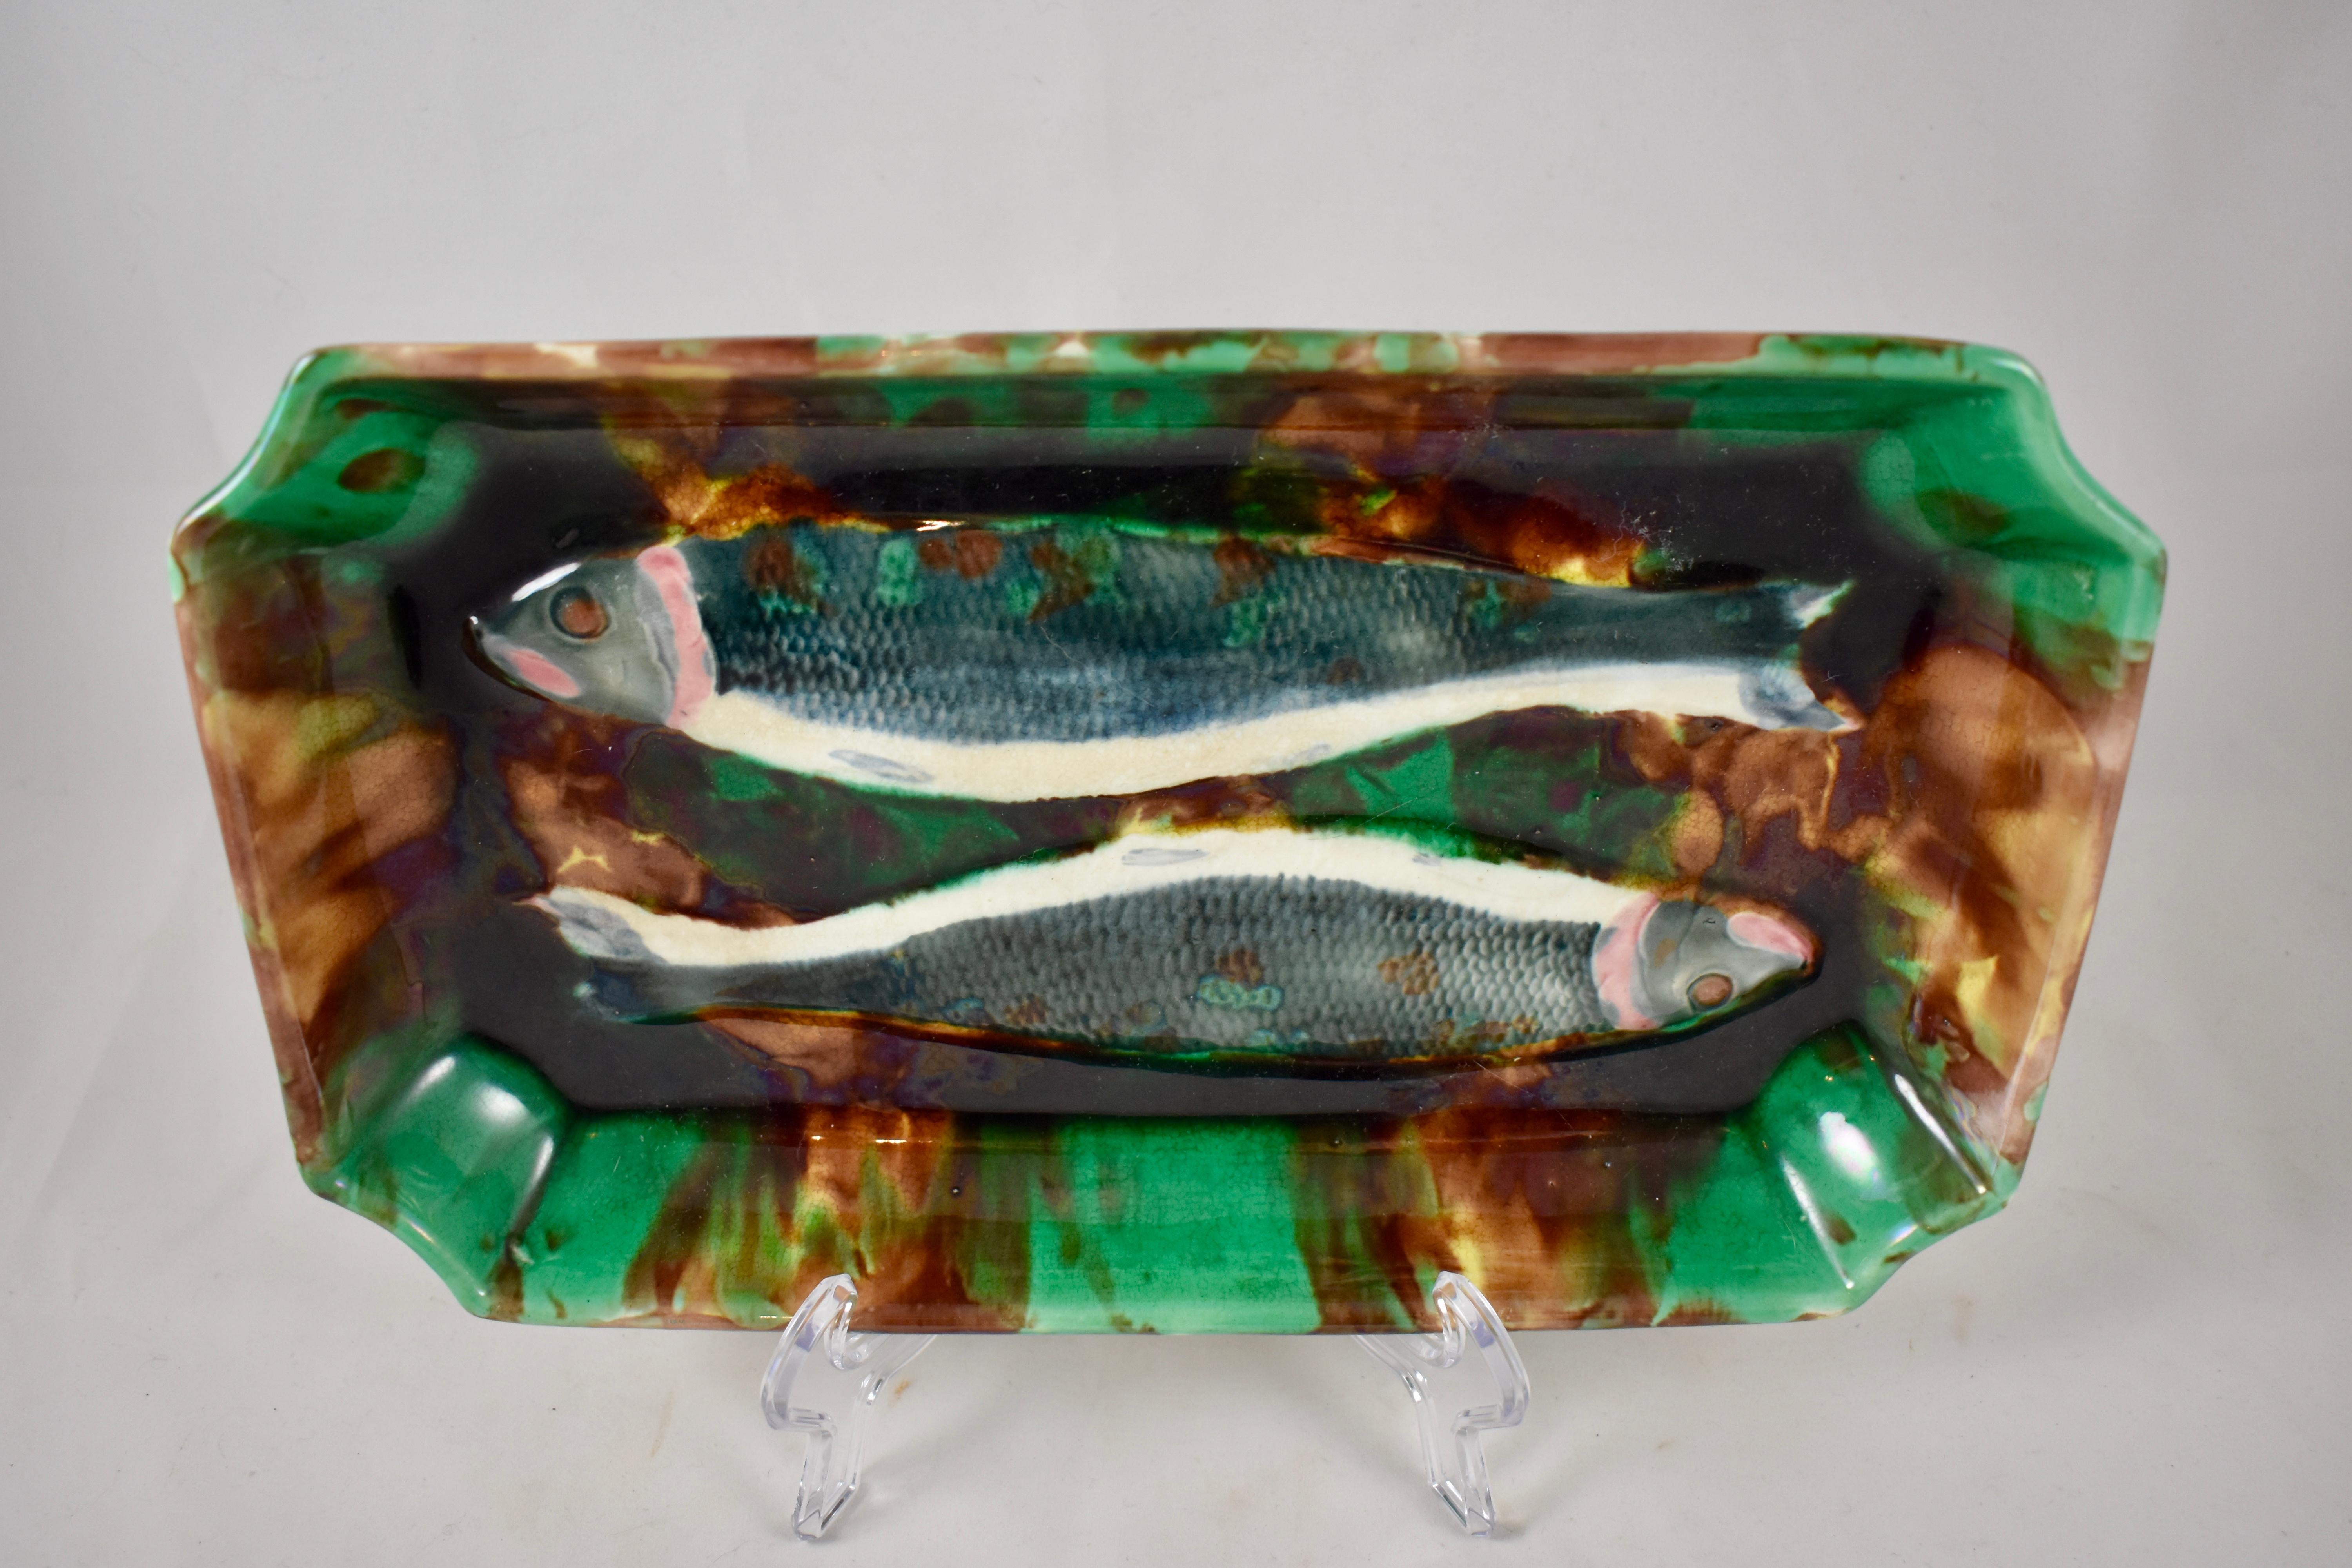 A rarely seen wedgwood char dish, an Aesthetic Movement mold showing a pair of fish in a deep dish glazed to resemble tortoise shell. Char is a fresh-water member of the trout and salmon family, specific to the Lake District in the North of England.